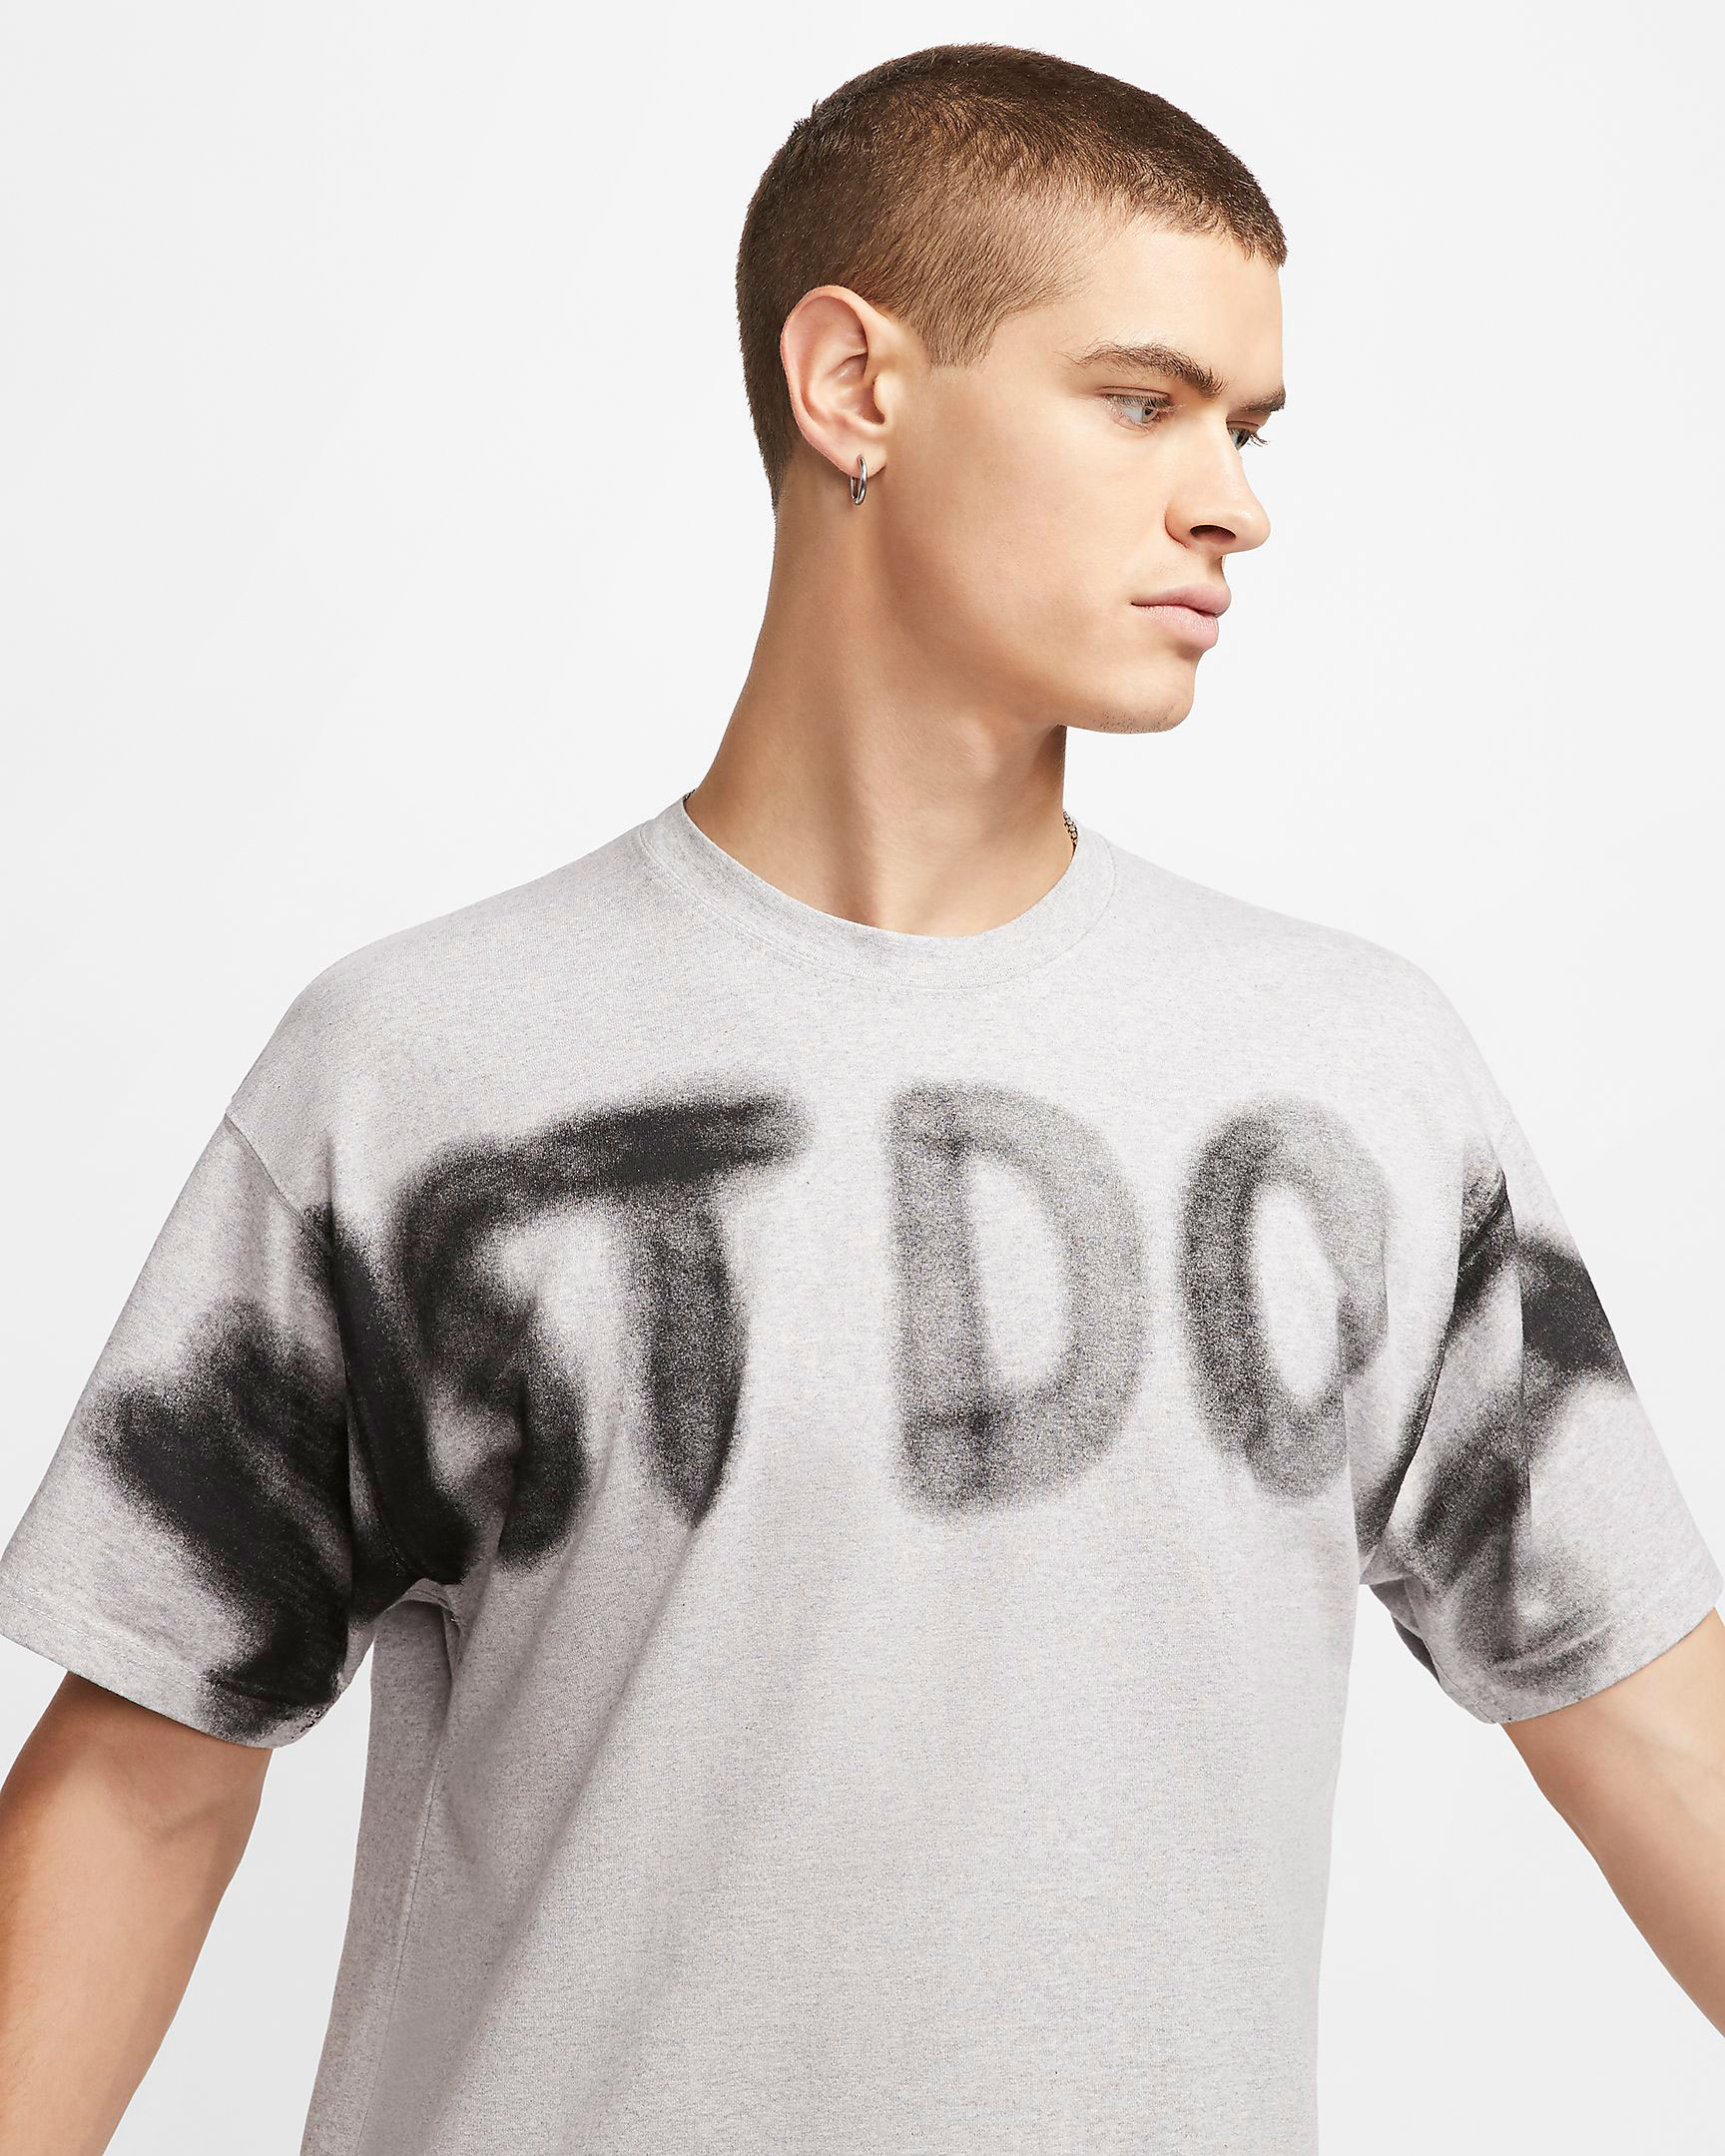 nike-space-hippie-just-do-it-shirt-1